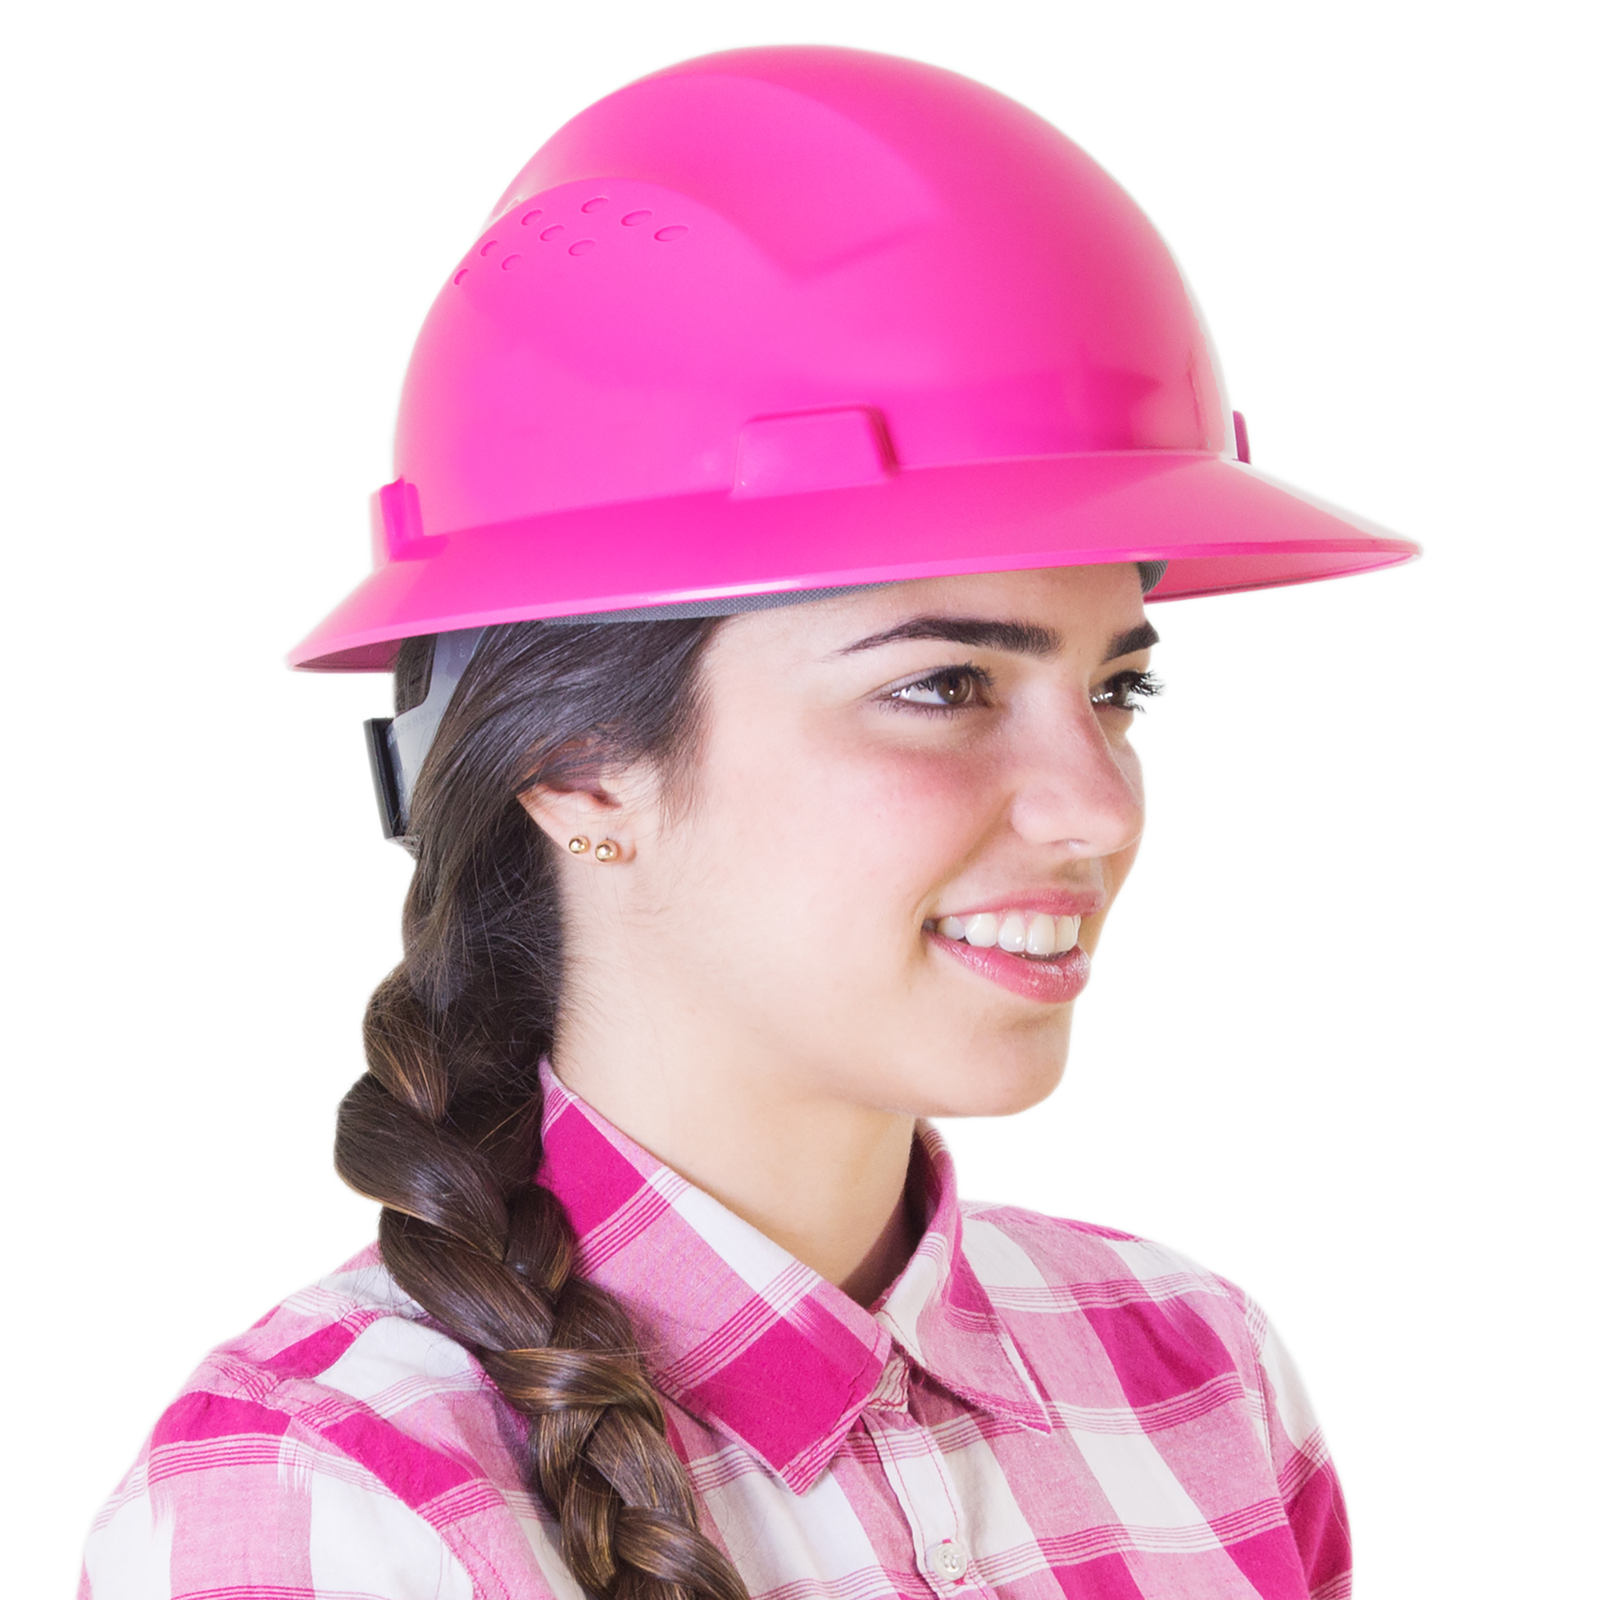 Lady wearing the full brim safety hard hat with 4 point suspension and wheel ratchet adjustment